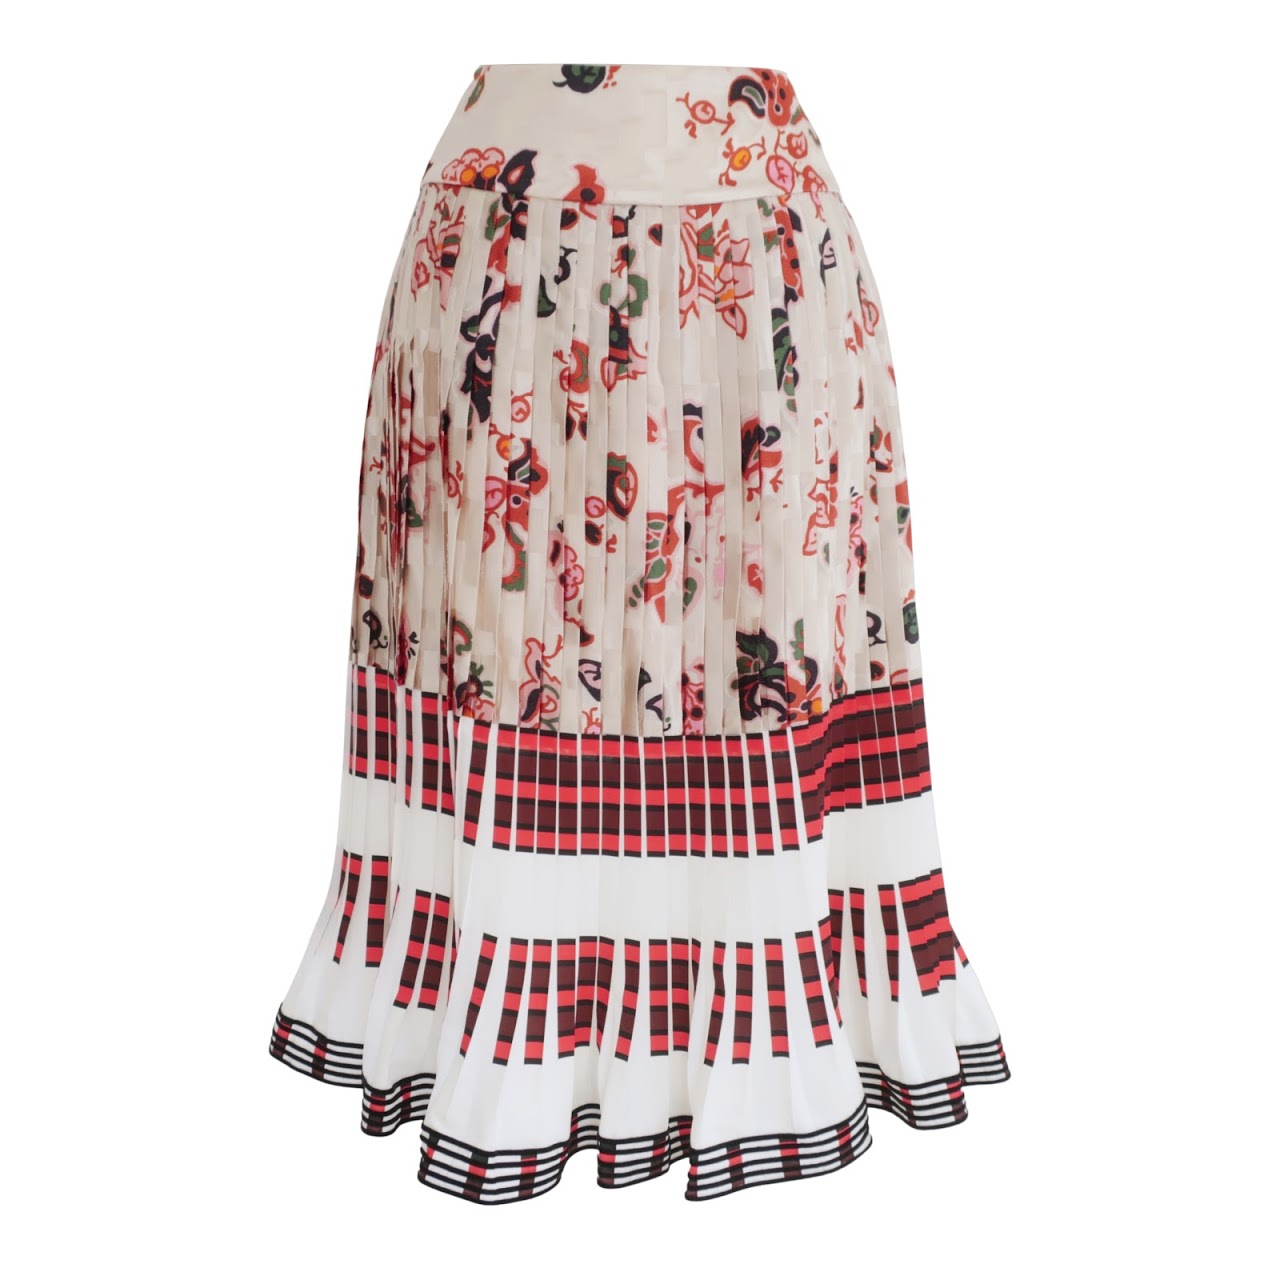 Tory Burch NEW Printed Pleated Skirt